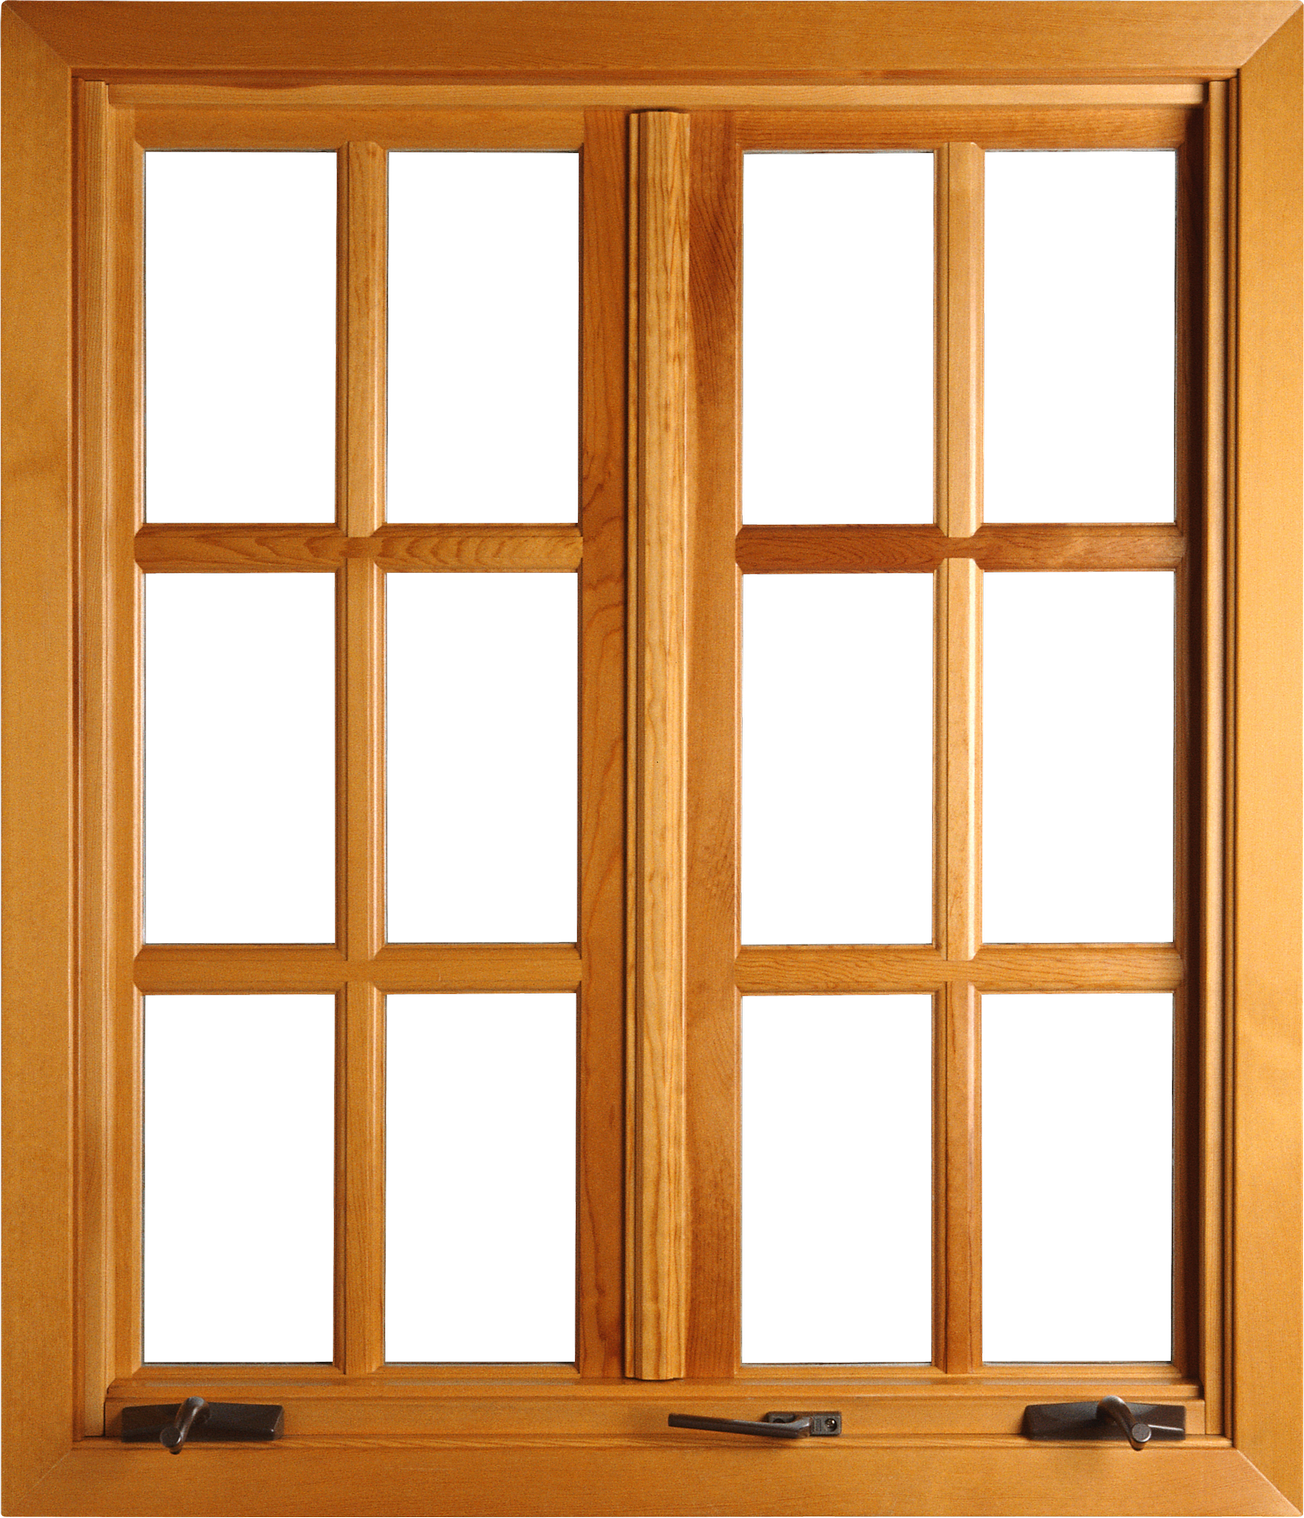 Wooden House Window Transparent Image